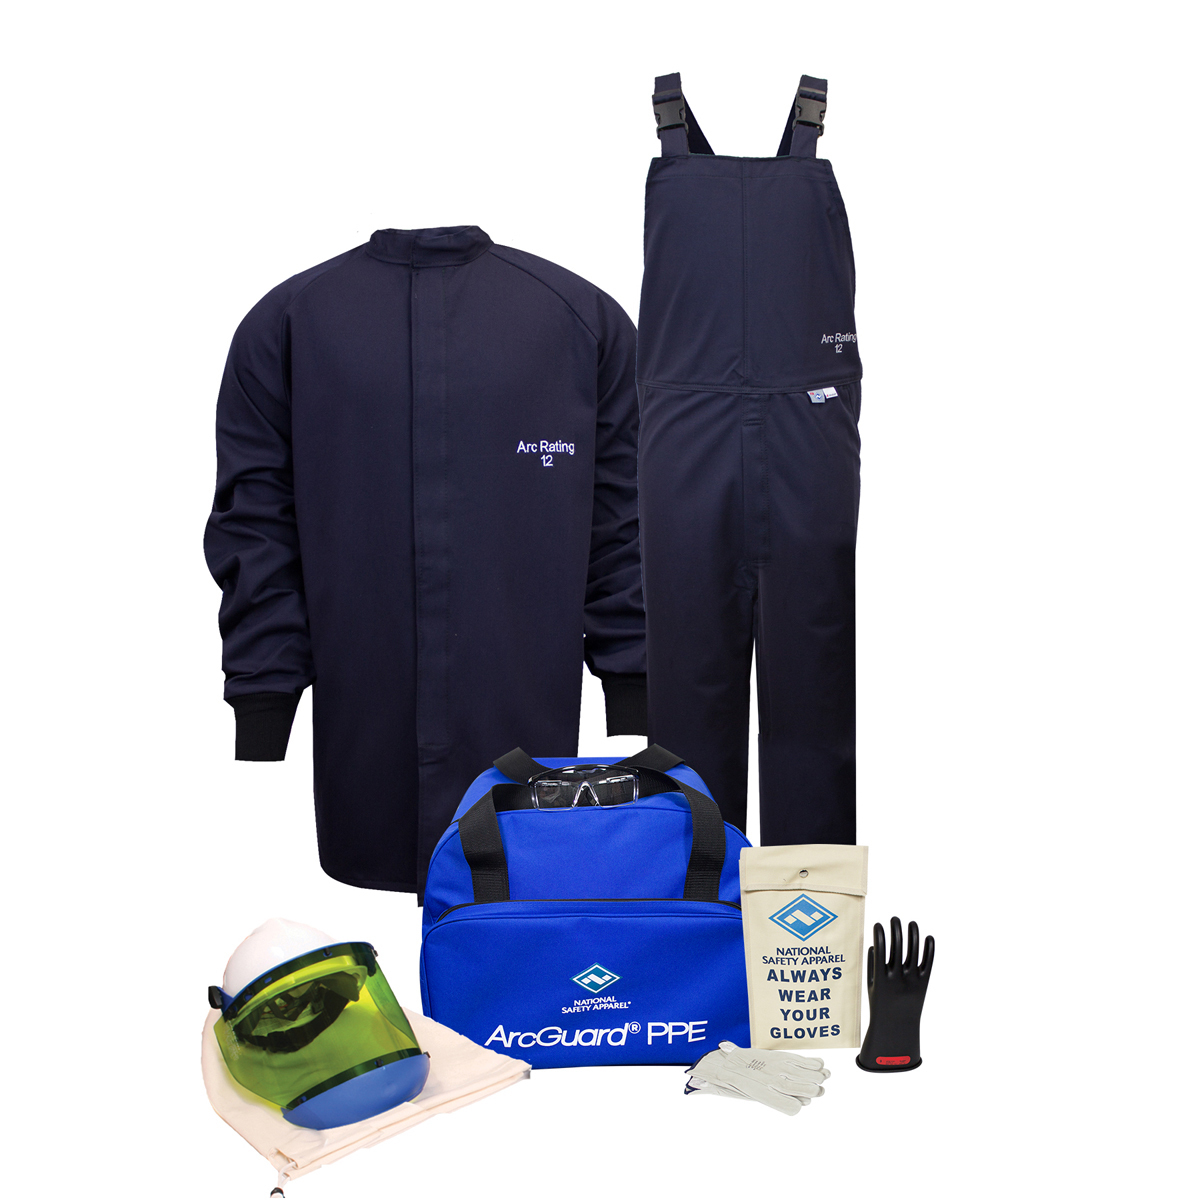 National Safety Apparel X-Large Navy Westex UltraSoft® ArcGuard® Flame Resistant Arc Flash Personal Protective Equipment Kit Wit